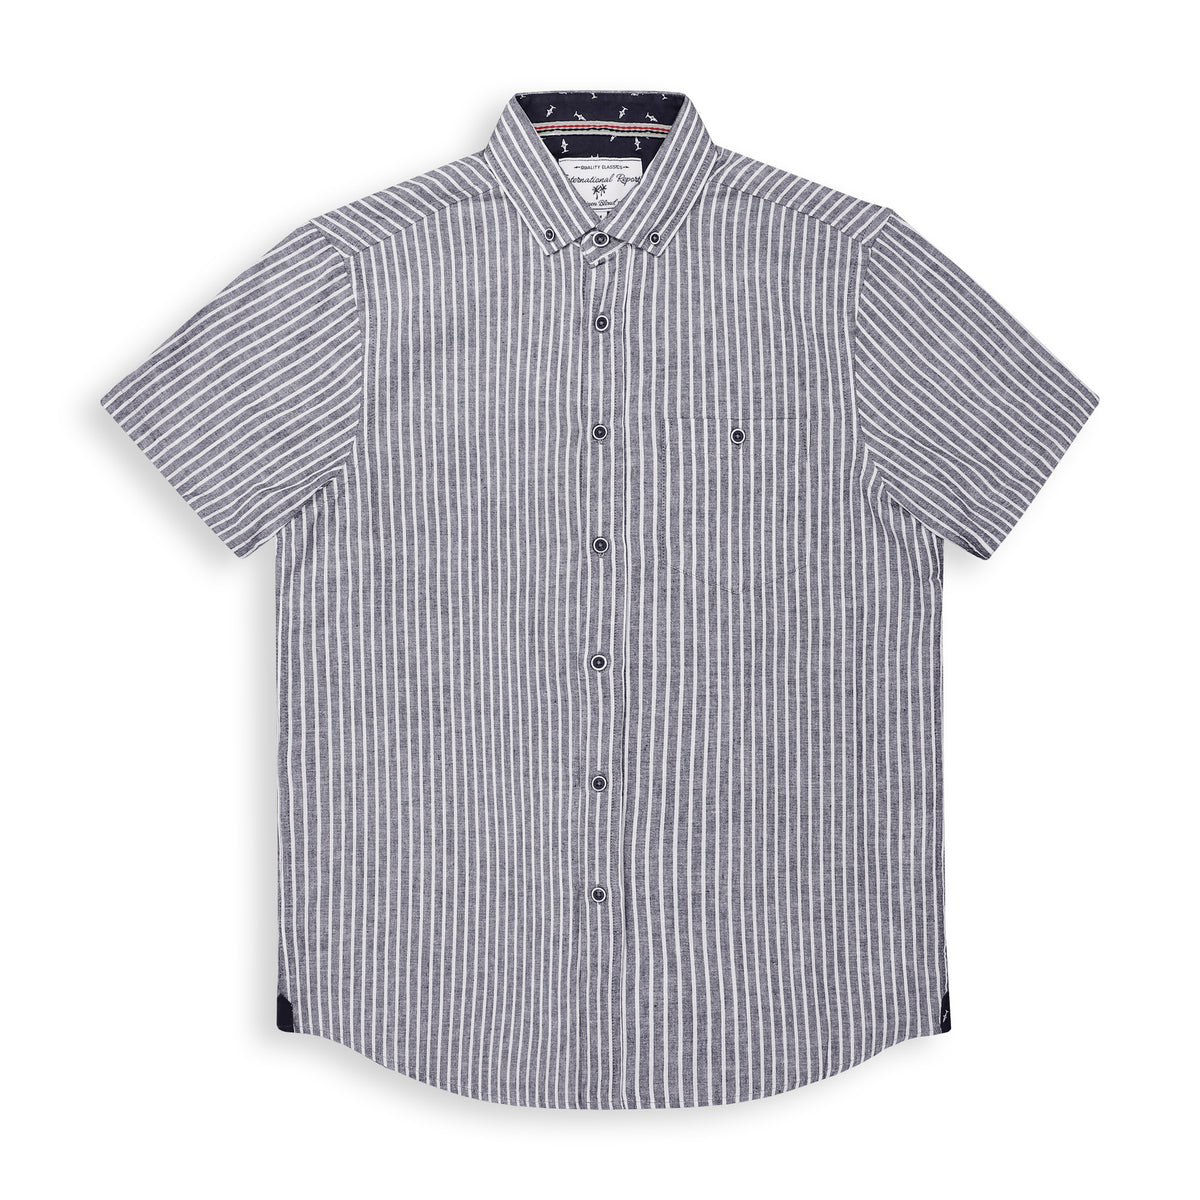 Front View of Short Sleeve Linen Blend Shirt with Stripes in Navy